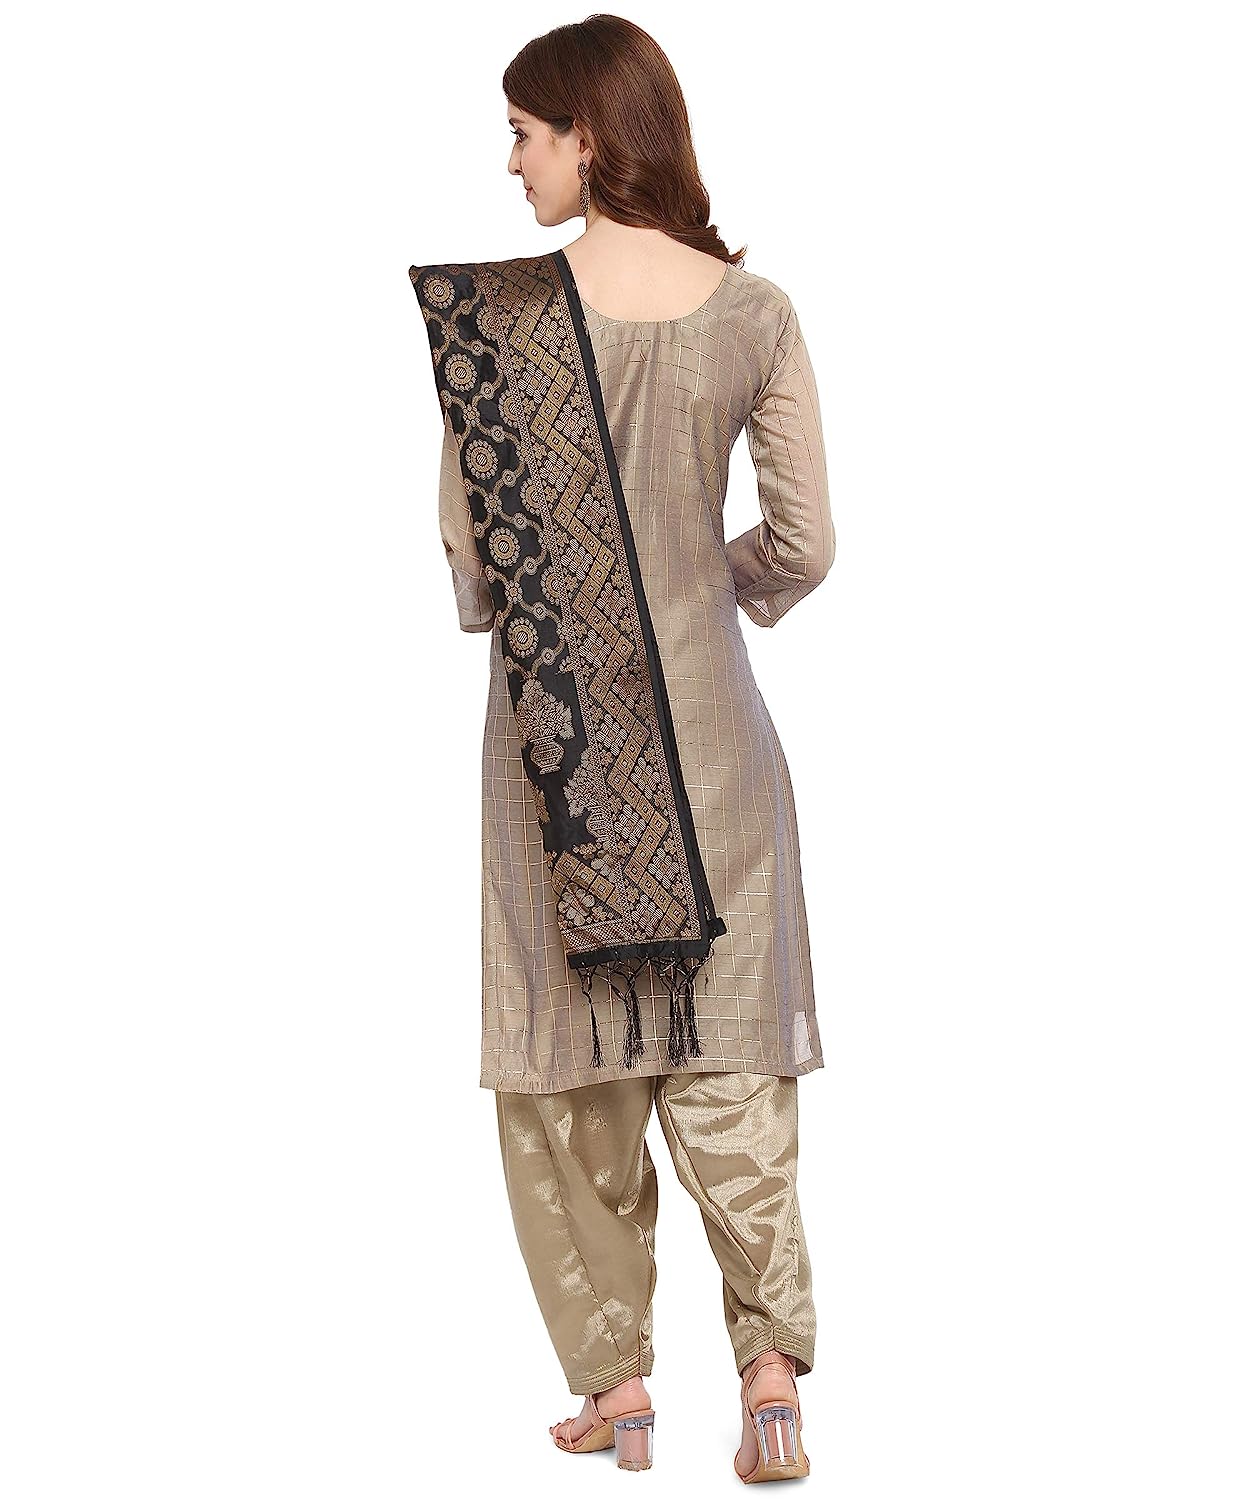 EthnicJunction Women's Chanderi Cotton Hand Embroidered Work Unstitched Salwar Suit Material With Banarasi Dupatta -  Salwar Suits in Sri Lanka from Arcade Online Shopping - Just Rs. 4390!